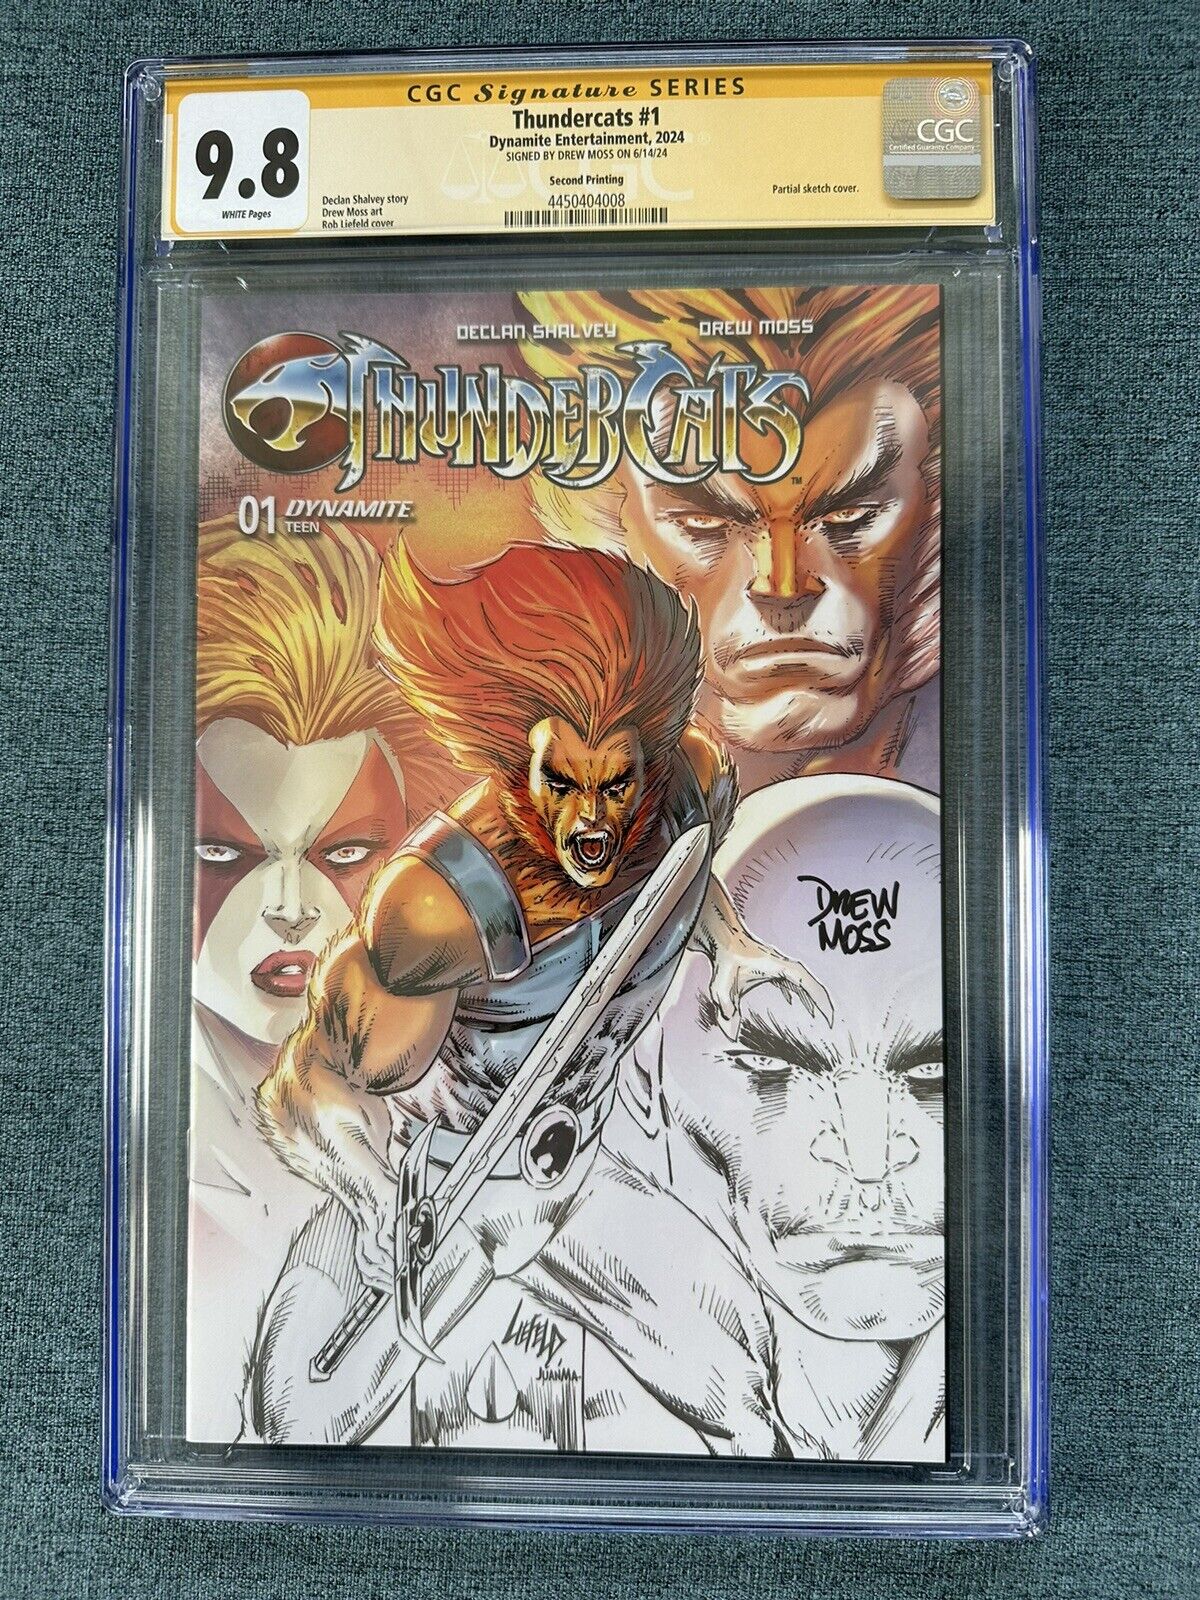 Thundercats #1 CGC 9.8 🔥Drew Moss Signature🔥Rob Liefeld Partial Sketch Cover